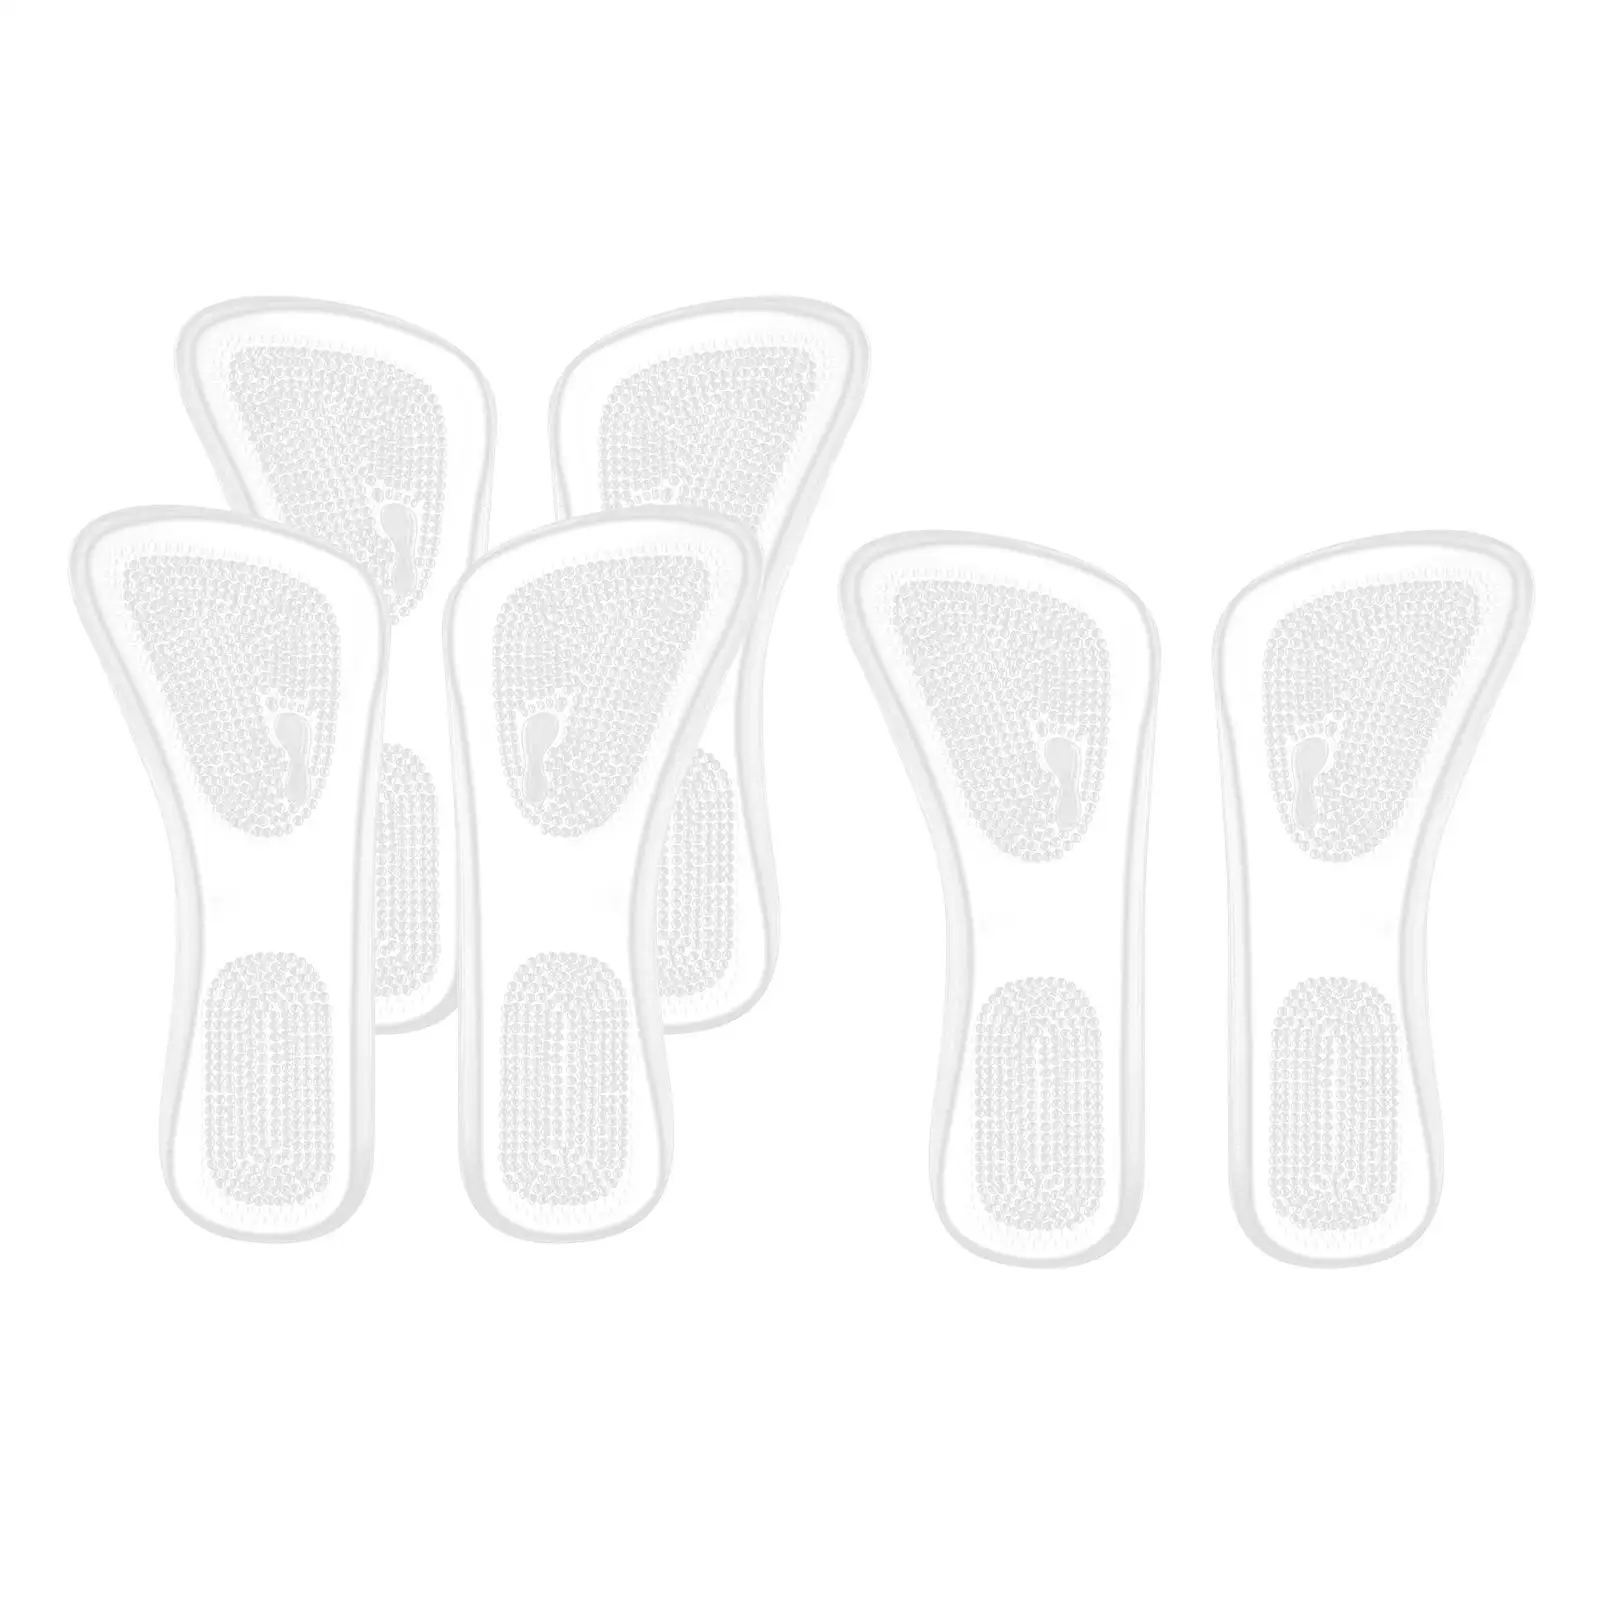 Transparent High Heel Insoles 3/4 Length Washable Shock Absorption Heel Cushion Inserts for Walking Shoes Sandals Boots